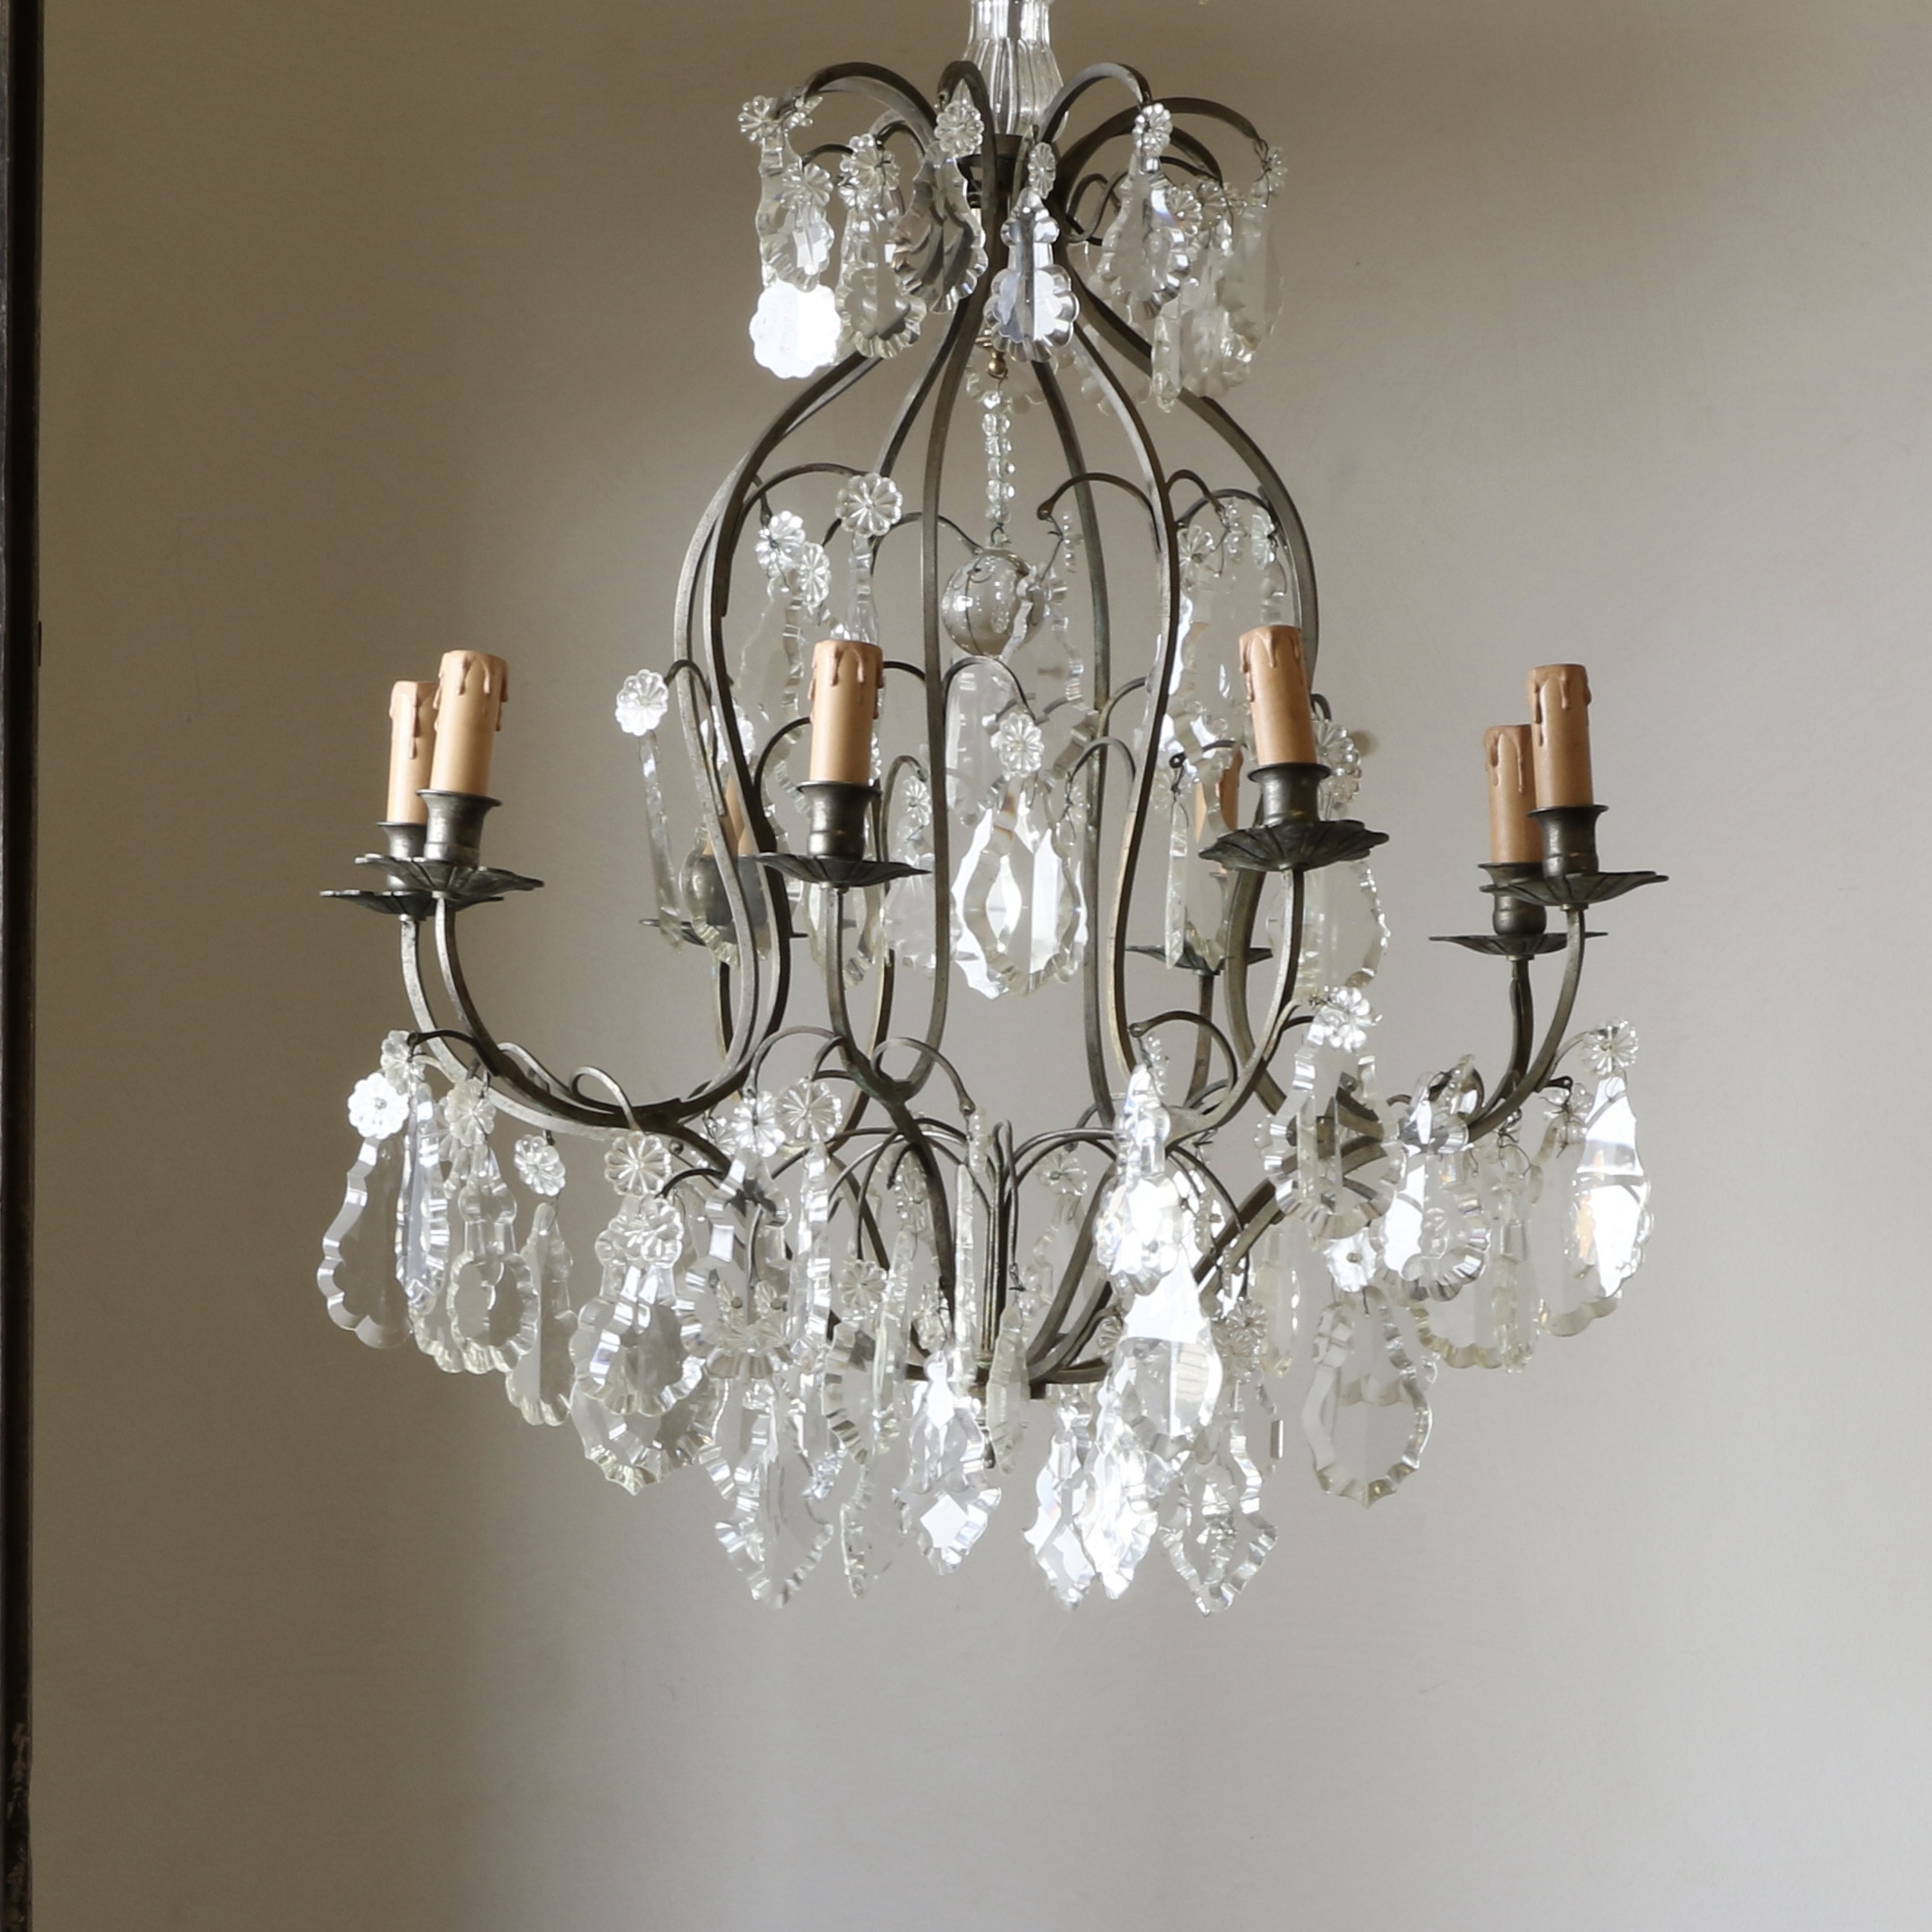 A Good French Chandelier